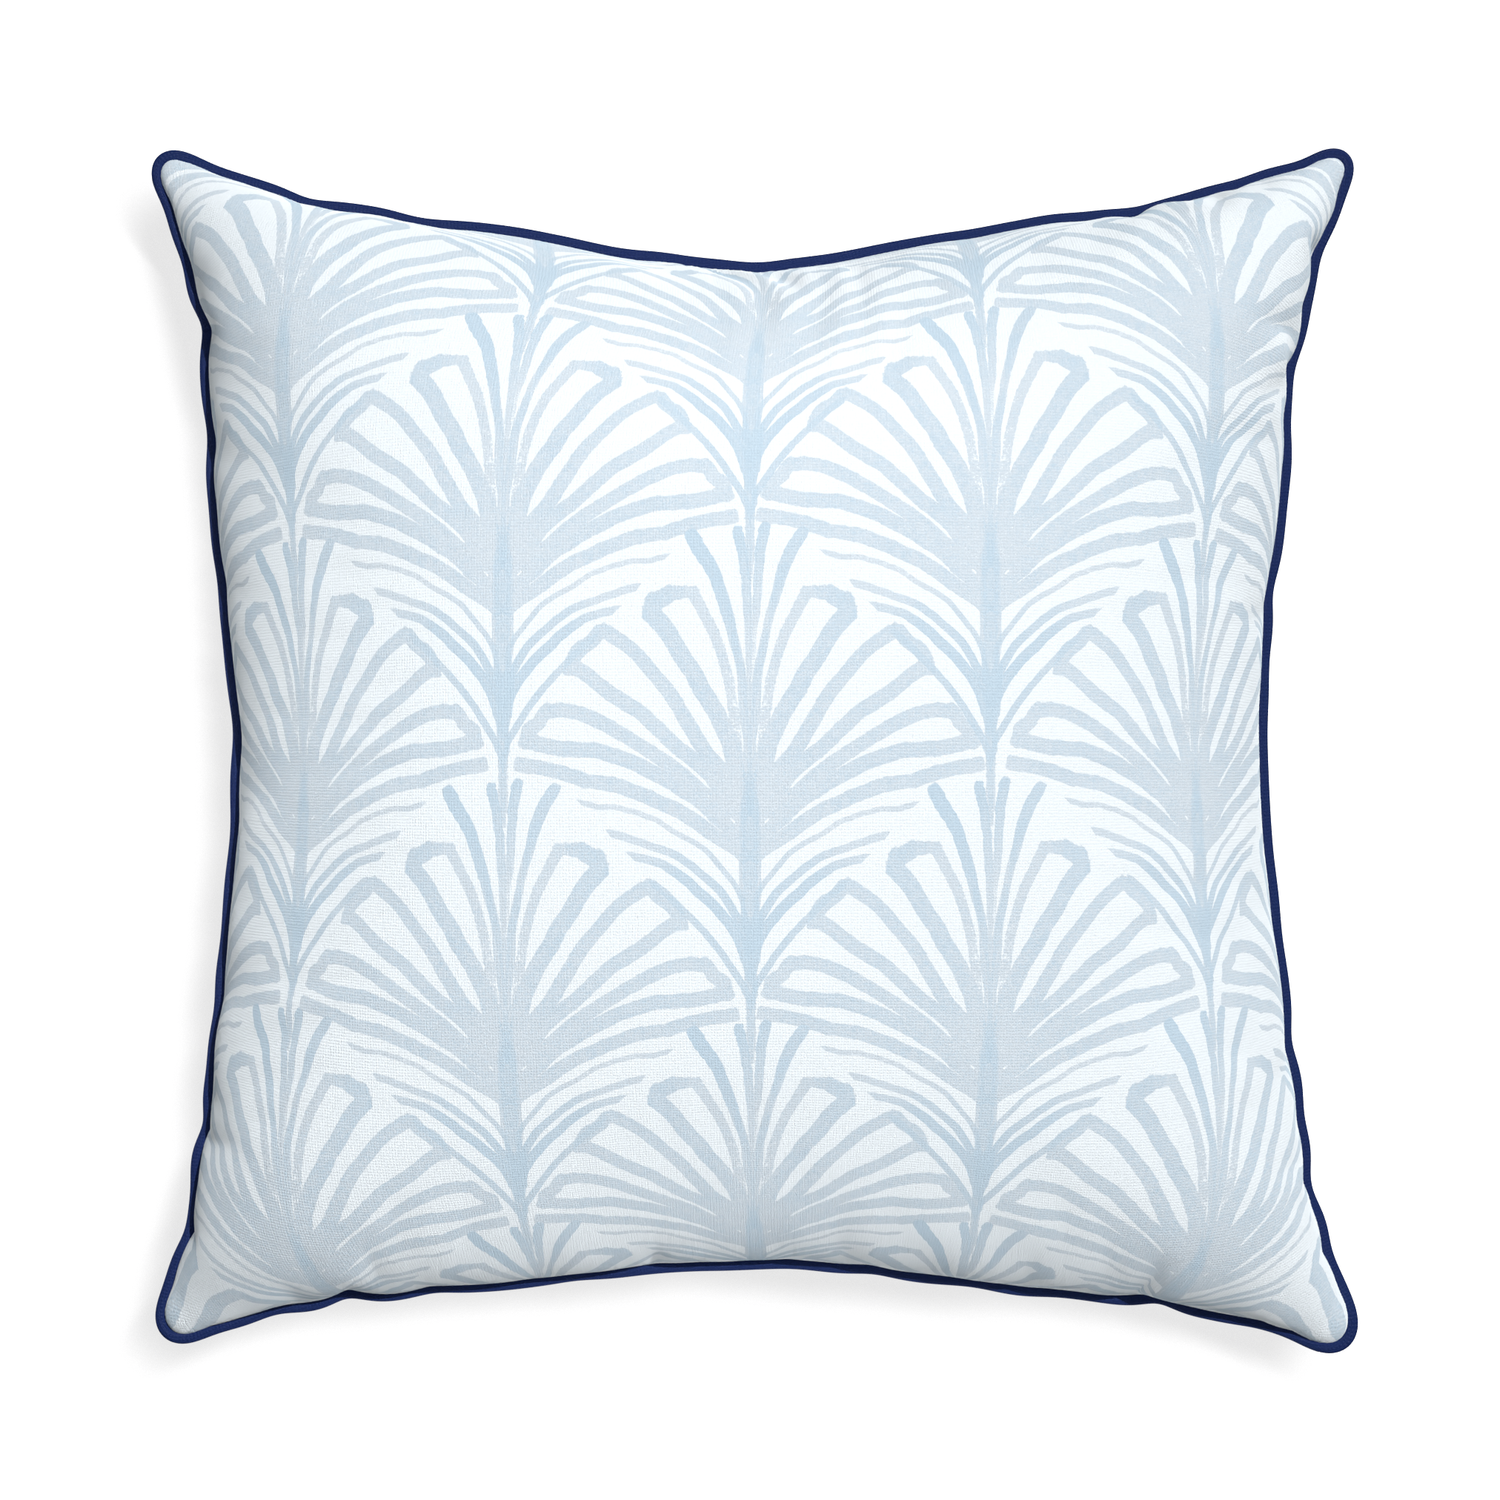 Euro-sham suzy sky custom pillow with midnight piping on white background